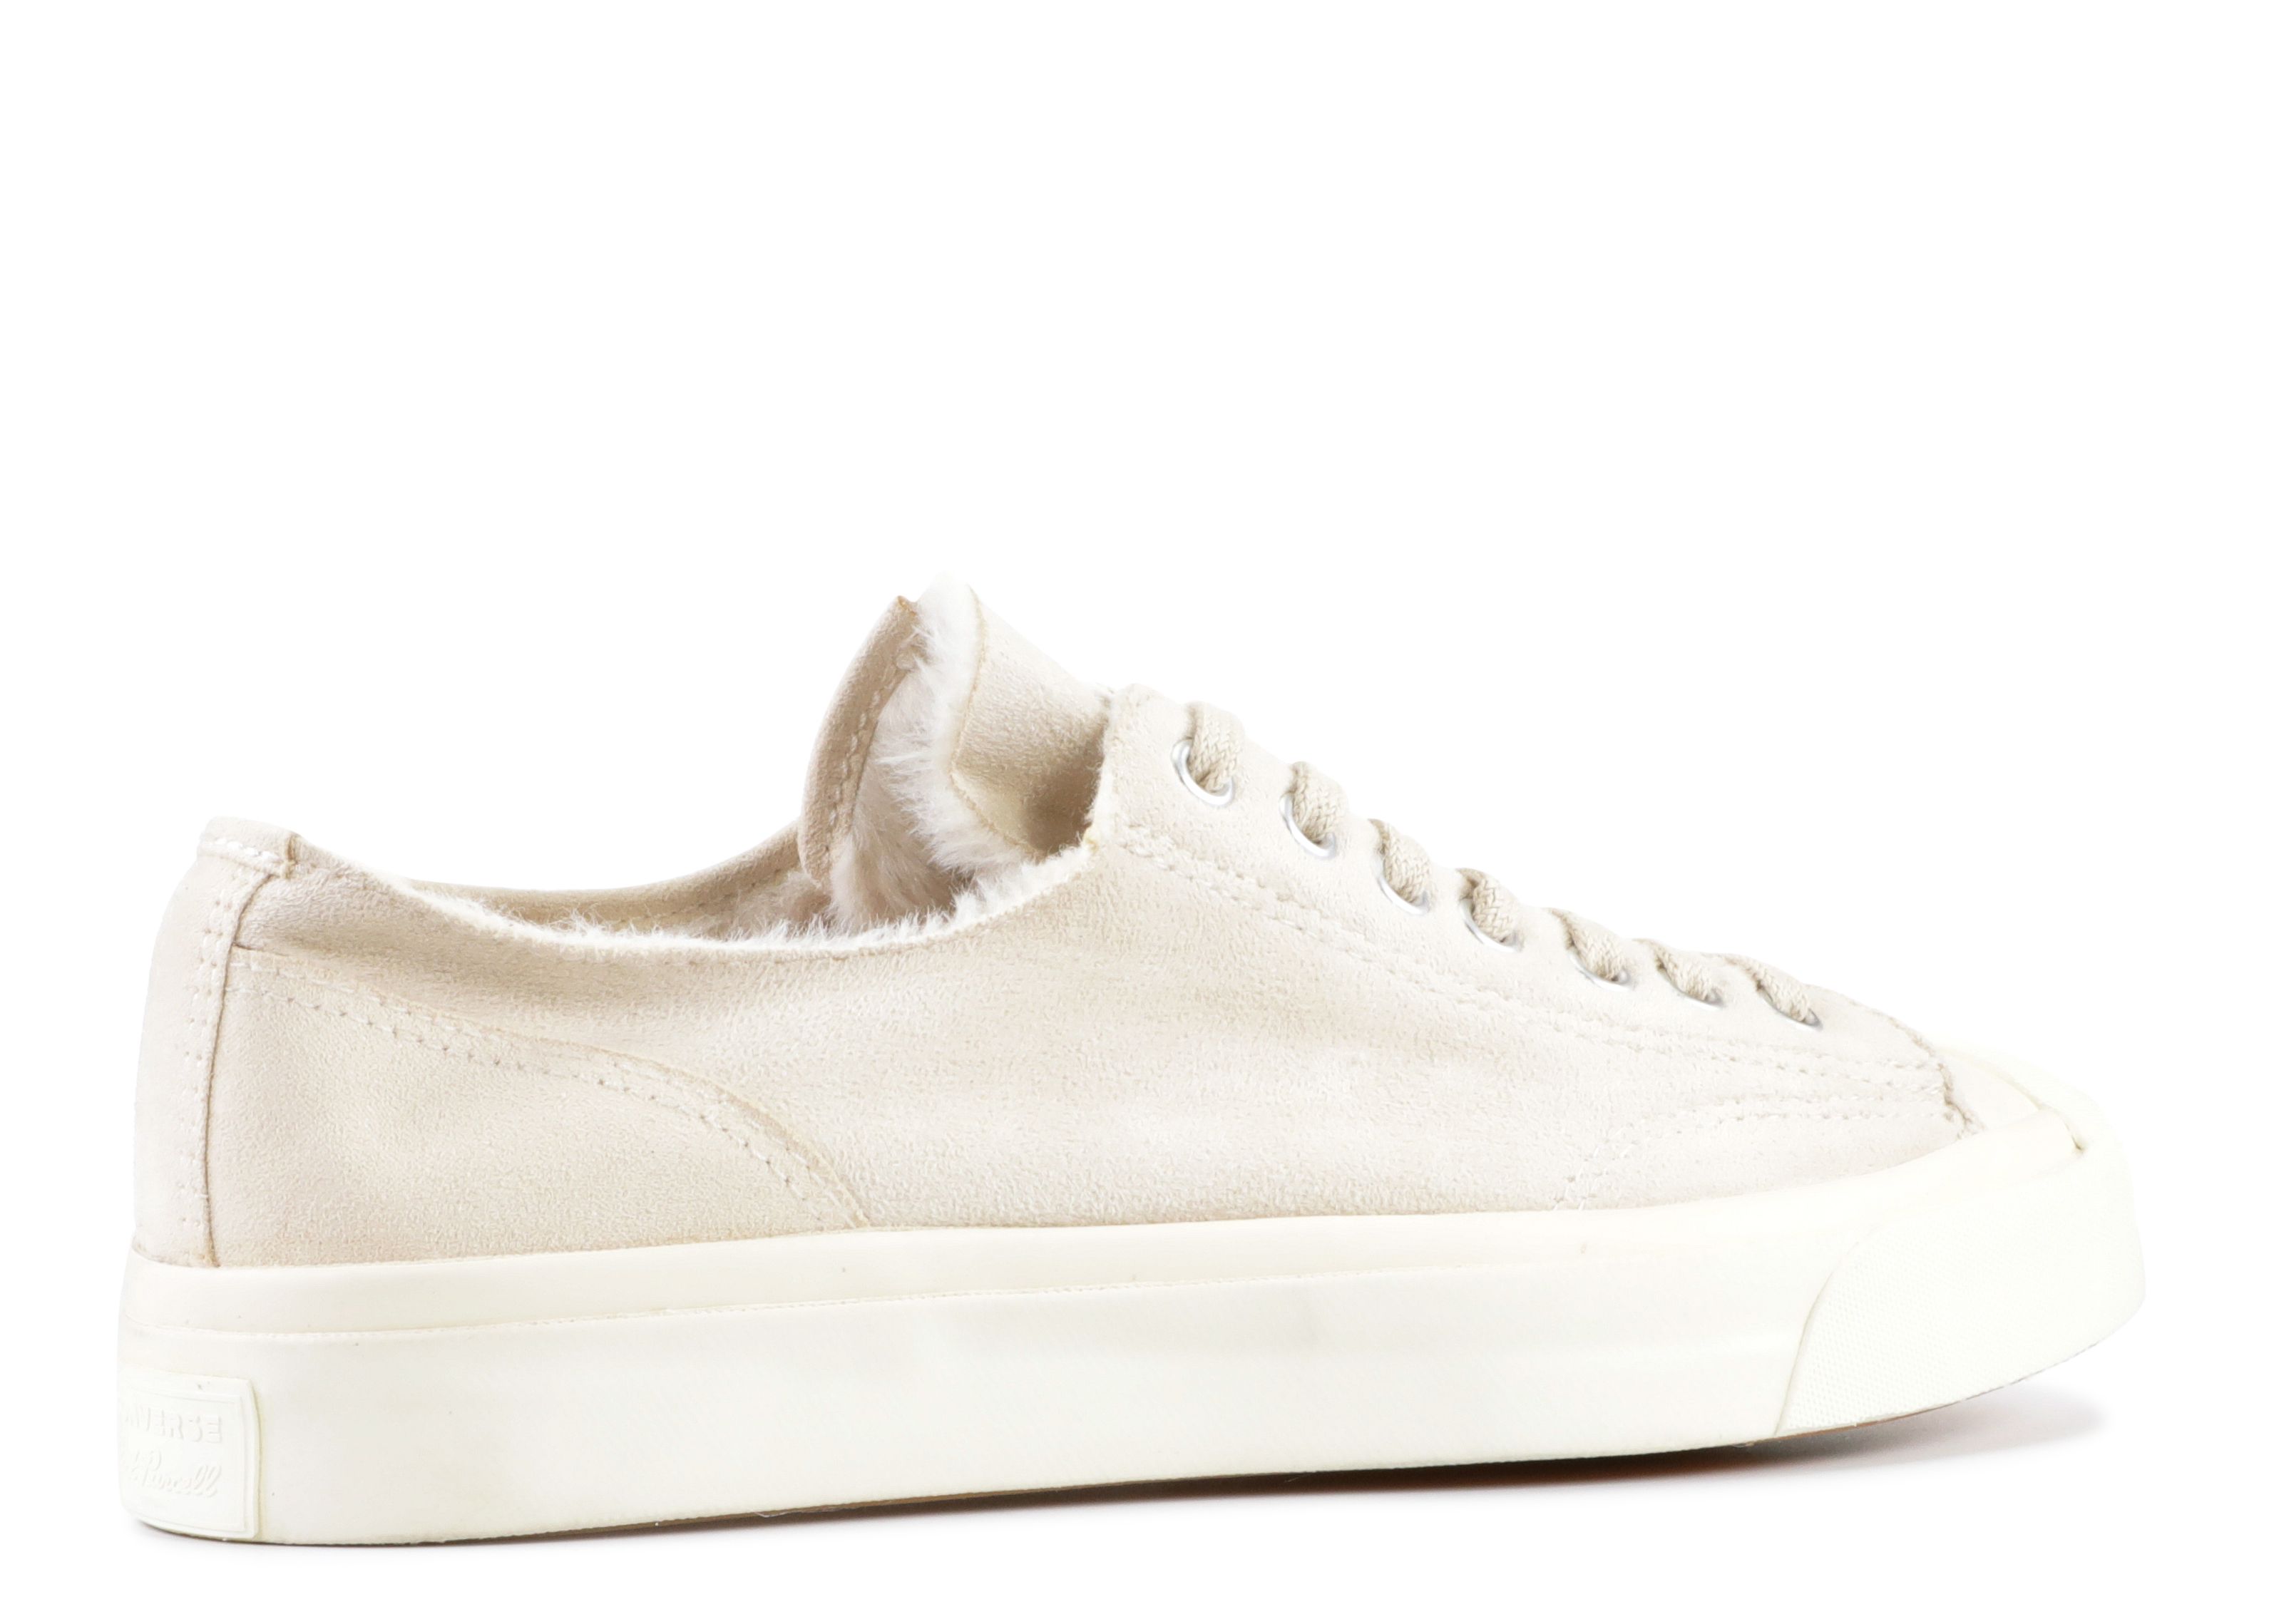 CLOT X Jack Purcell Low 'Ice Cold' - Converse - - white swan/egret/white swan Flight Club